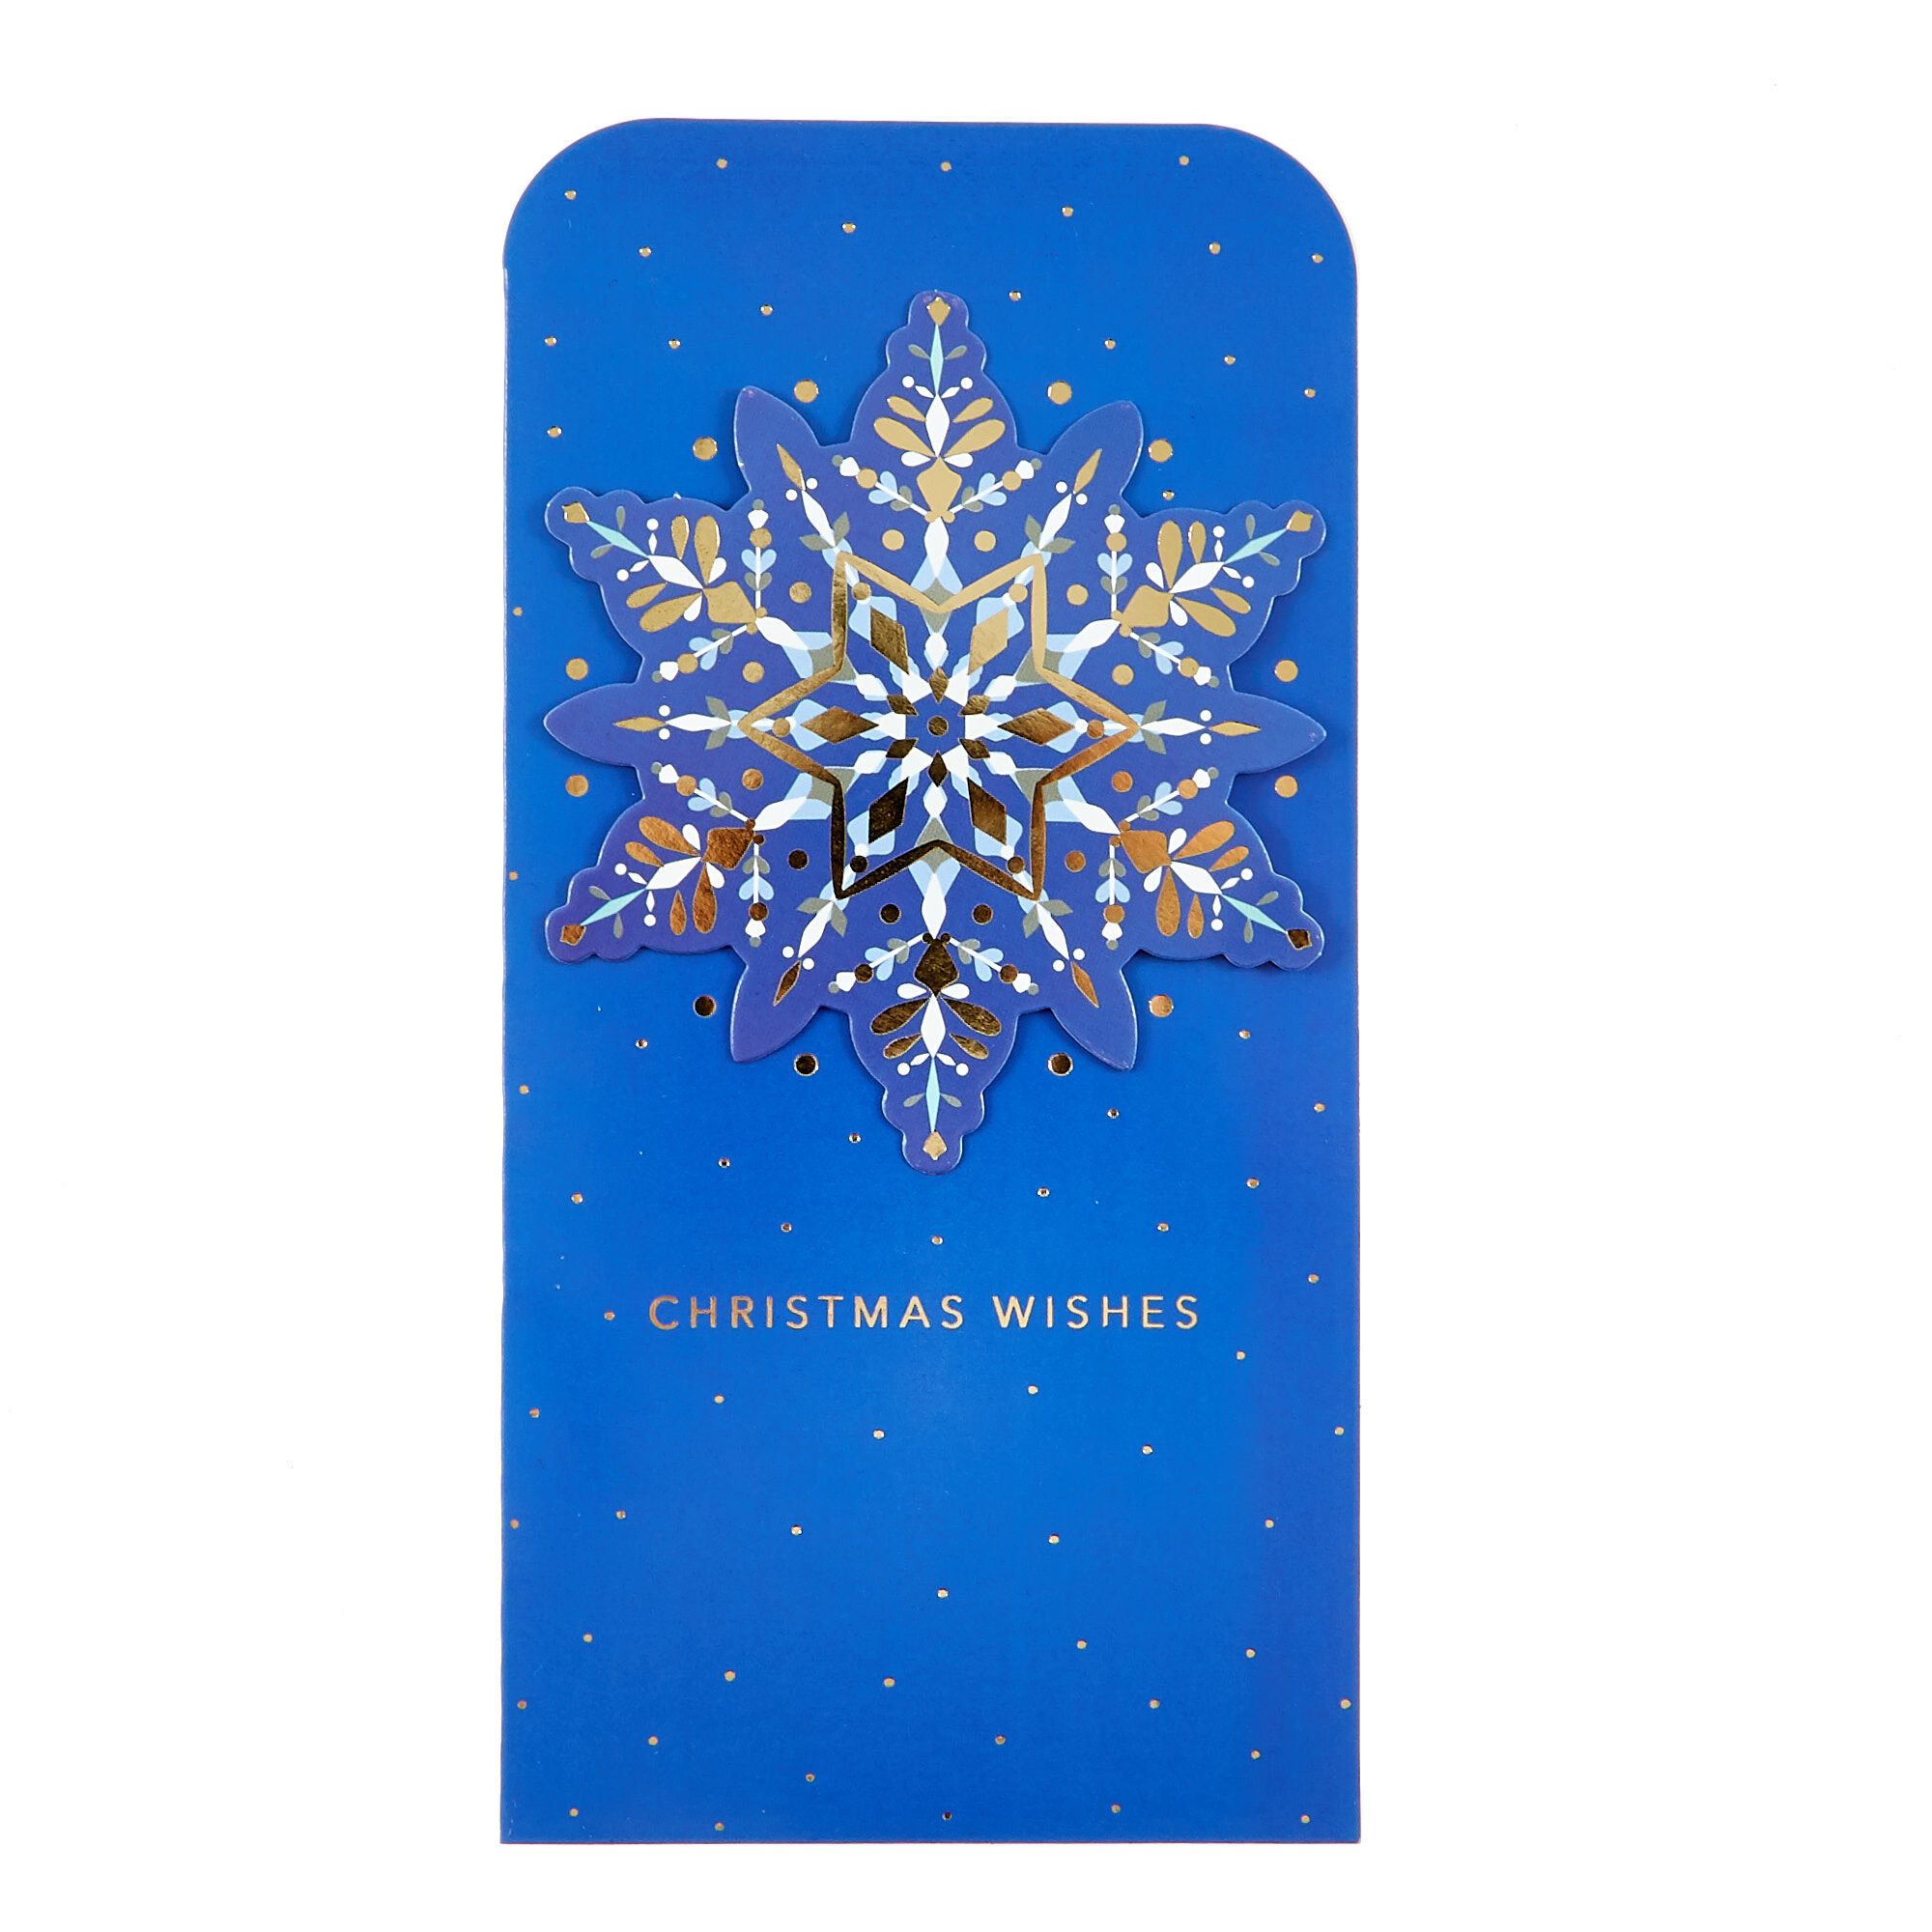 Xmas Money Wallets Contemporary Pack of 4